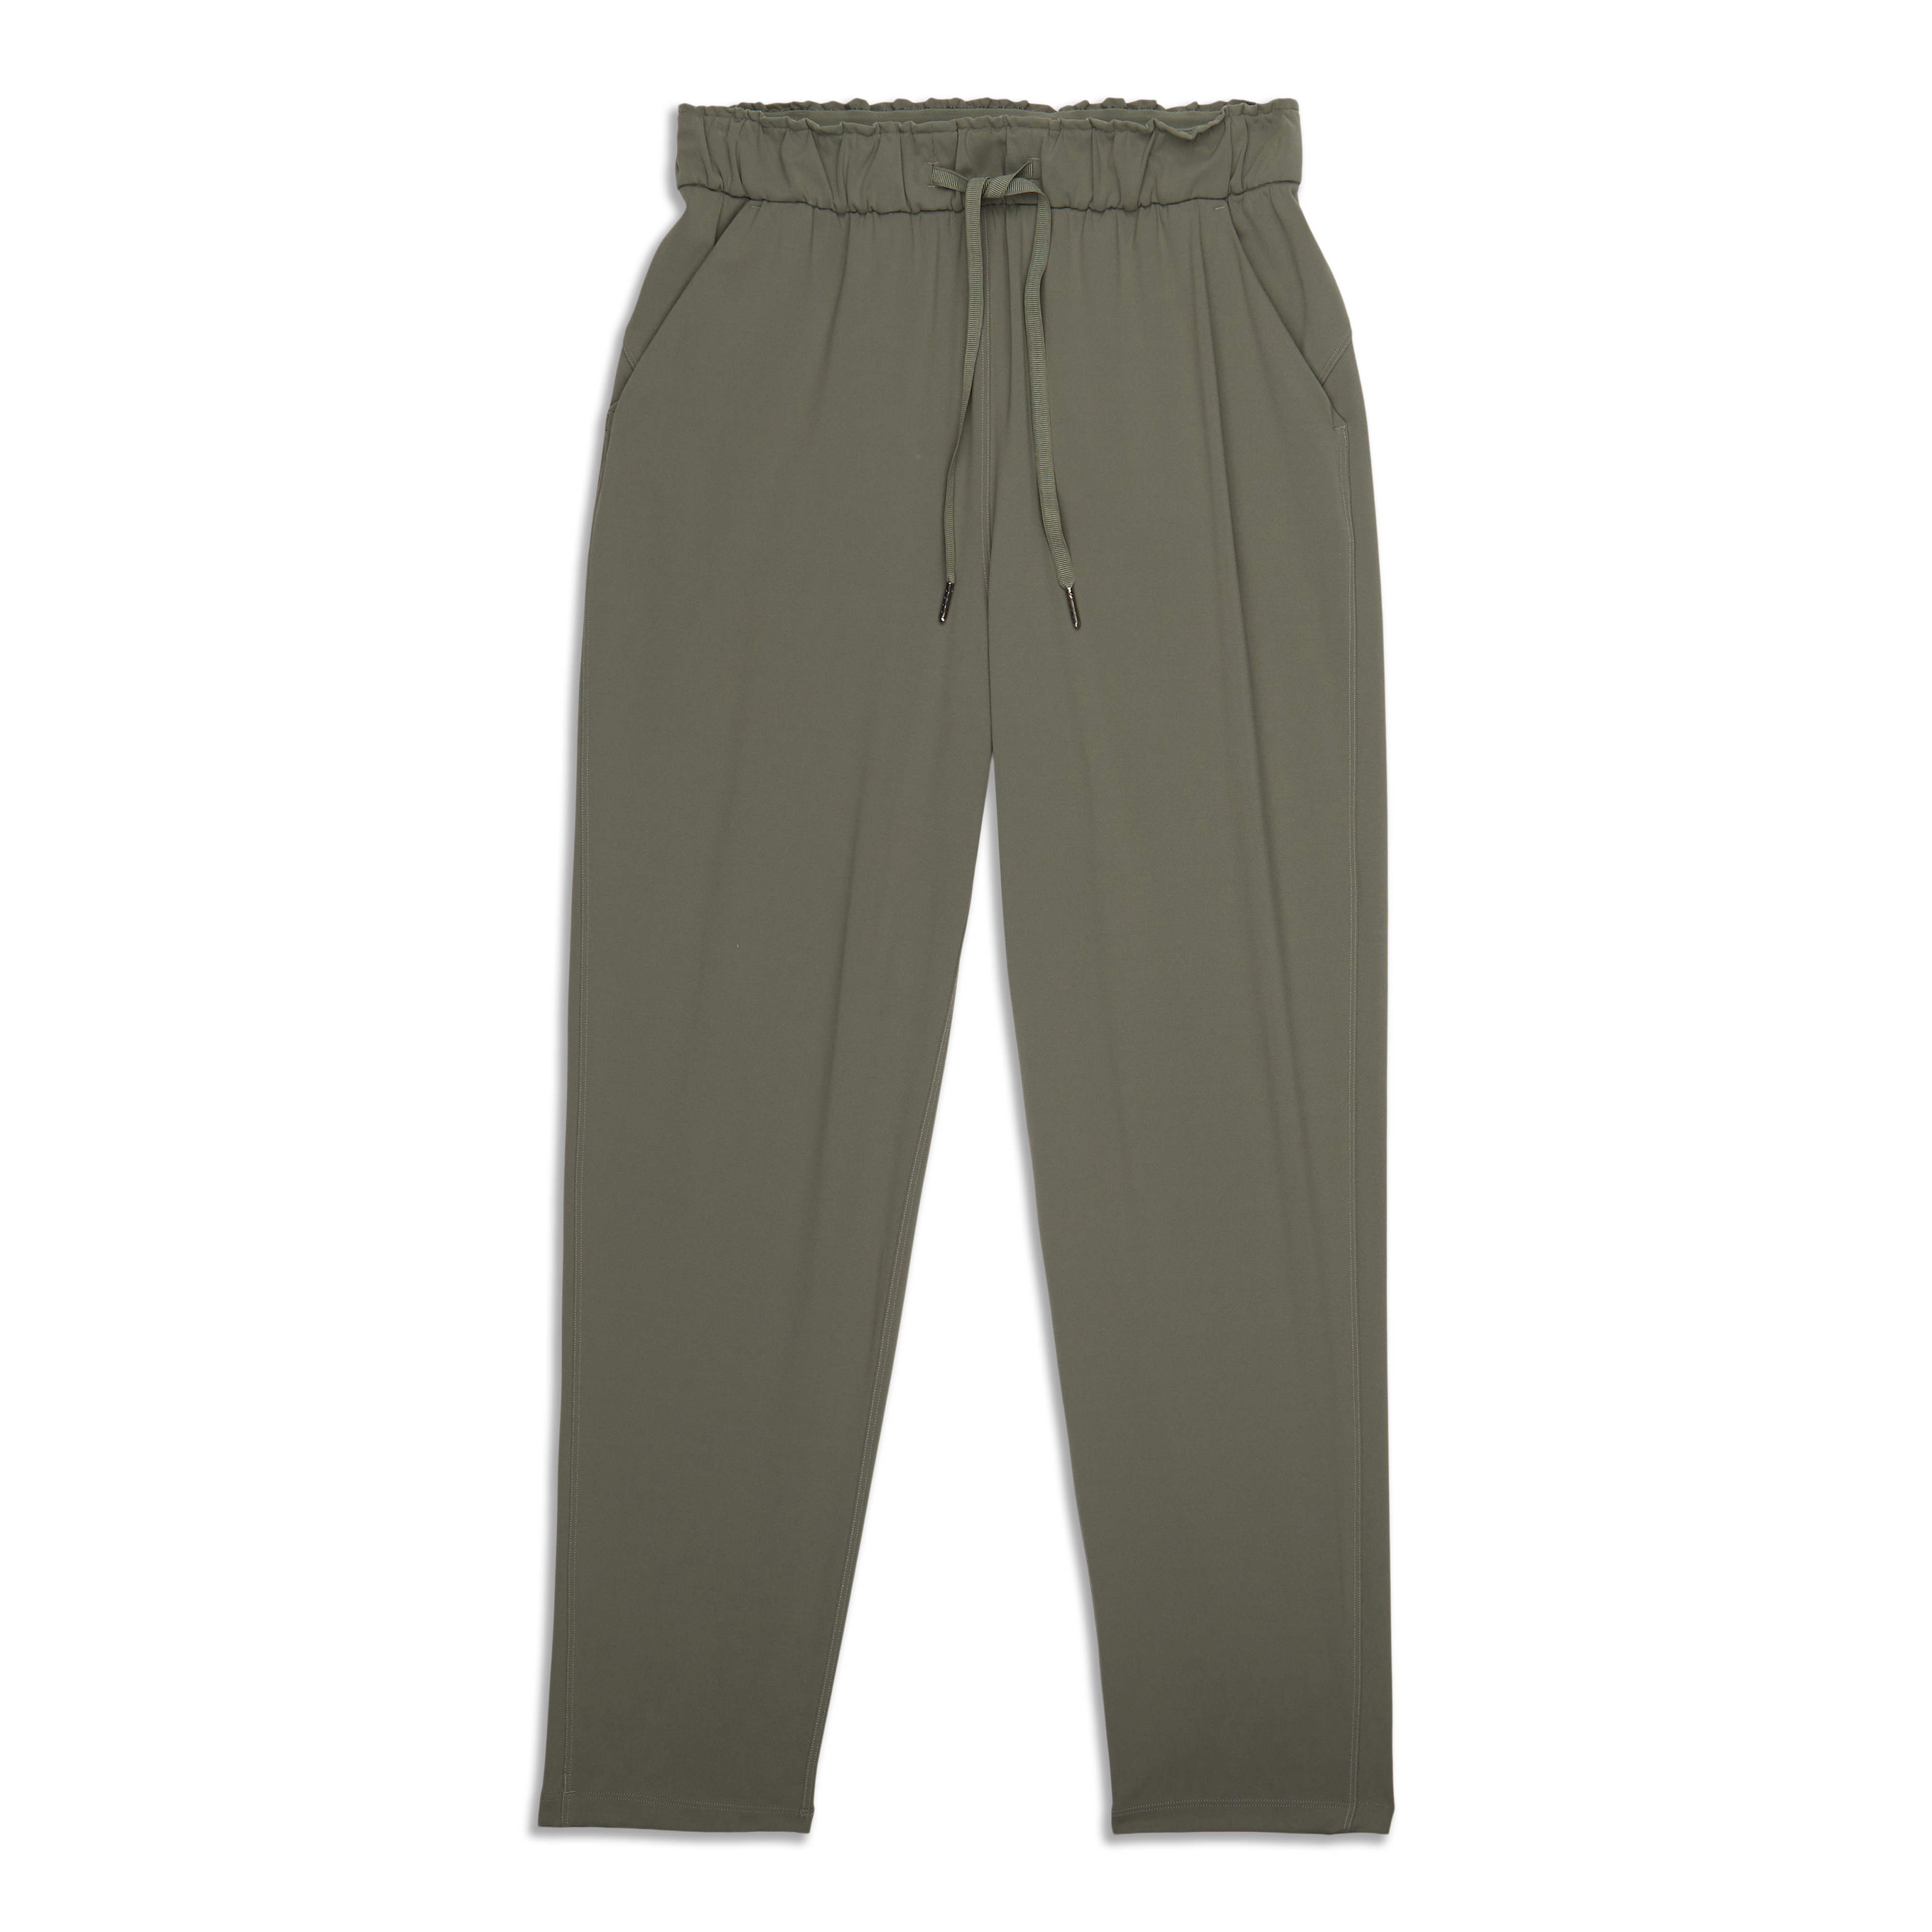 Lululemon Keep Moving Graphite Grey 7/8 High-Rise Work Trouser Pants Size 6  - $69 - From Madison